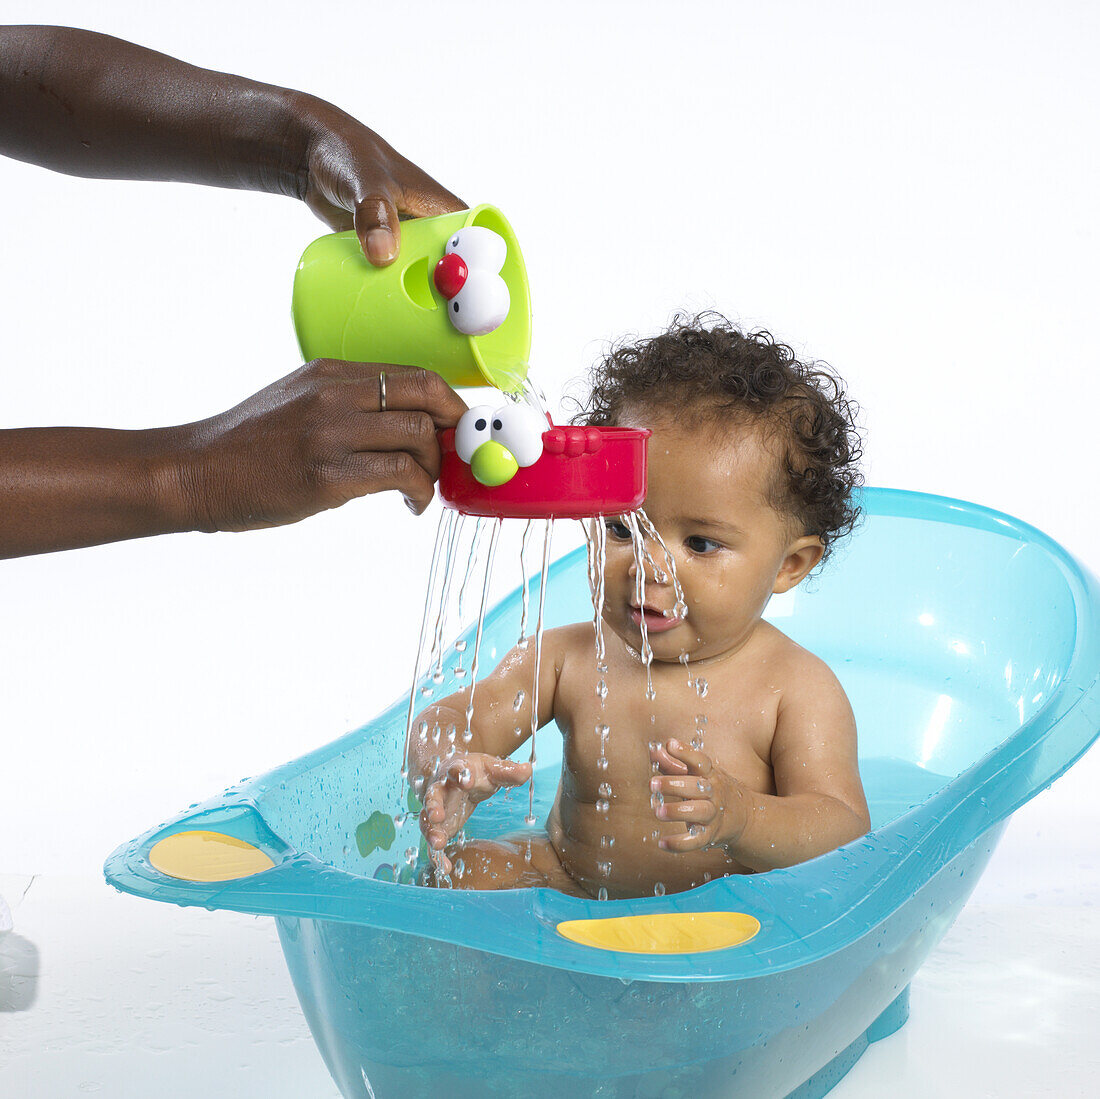 Hand pouring water through a toy for a baby in a bath